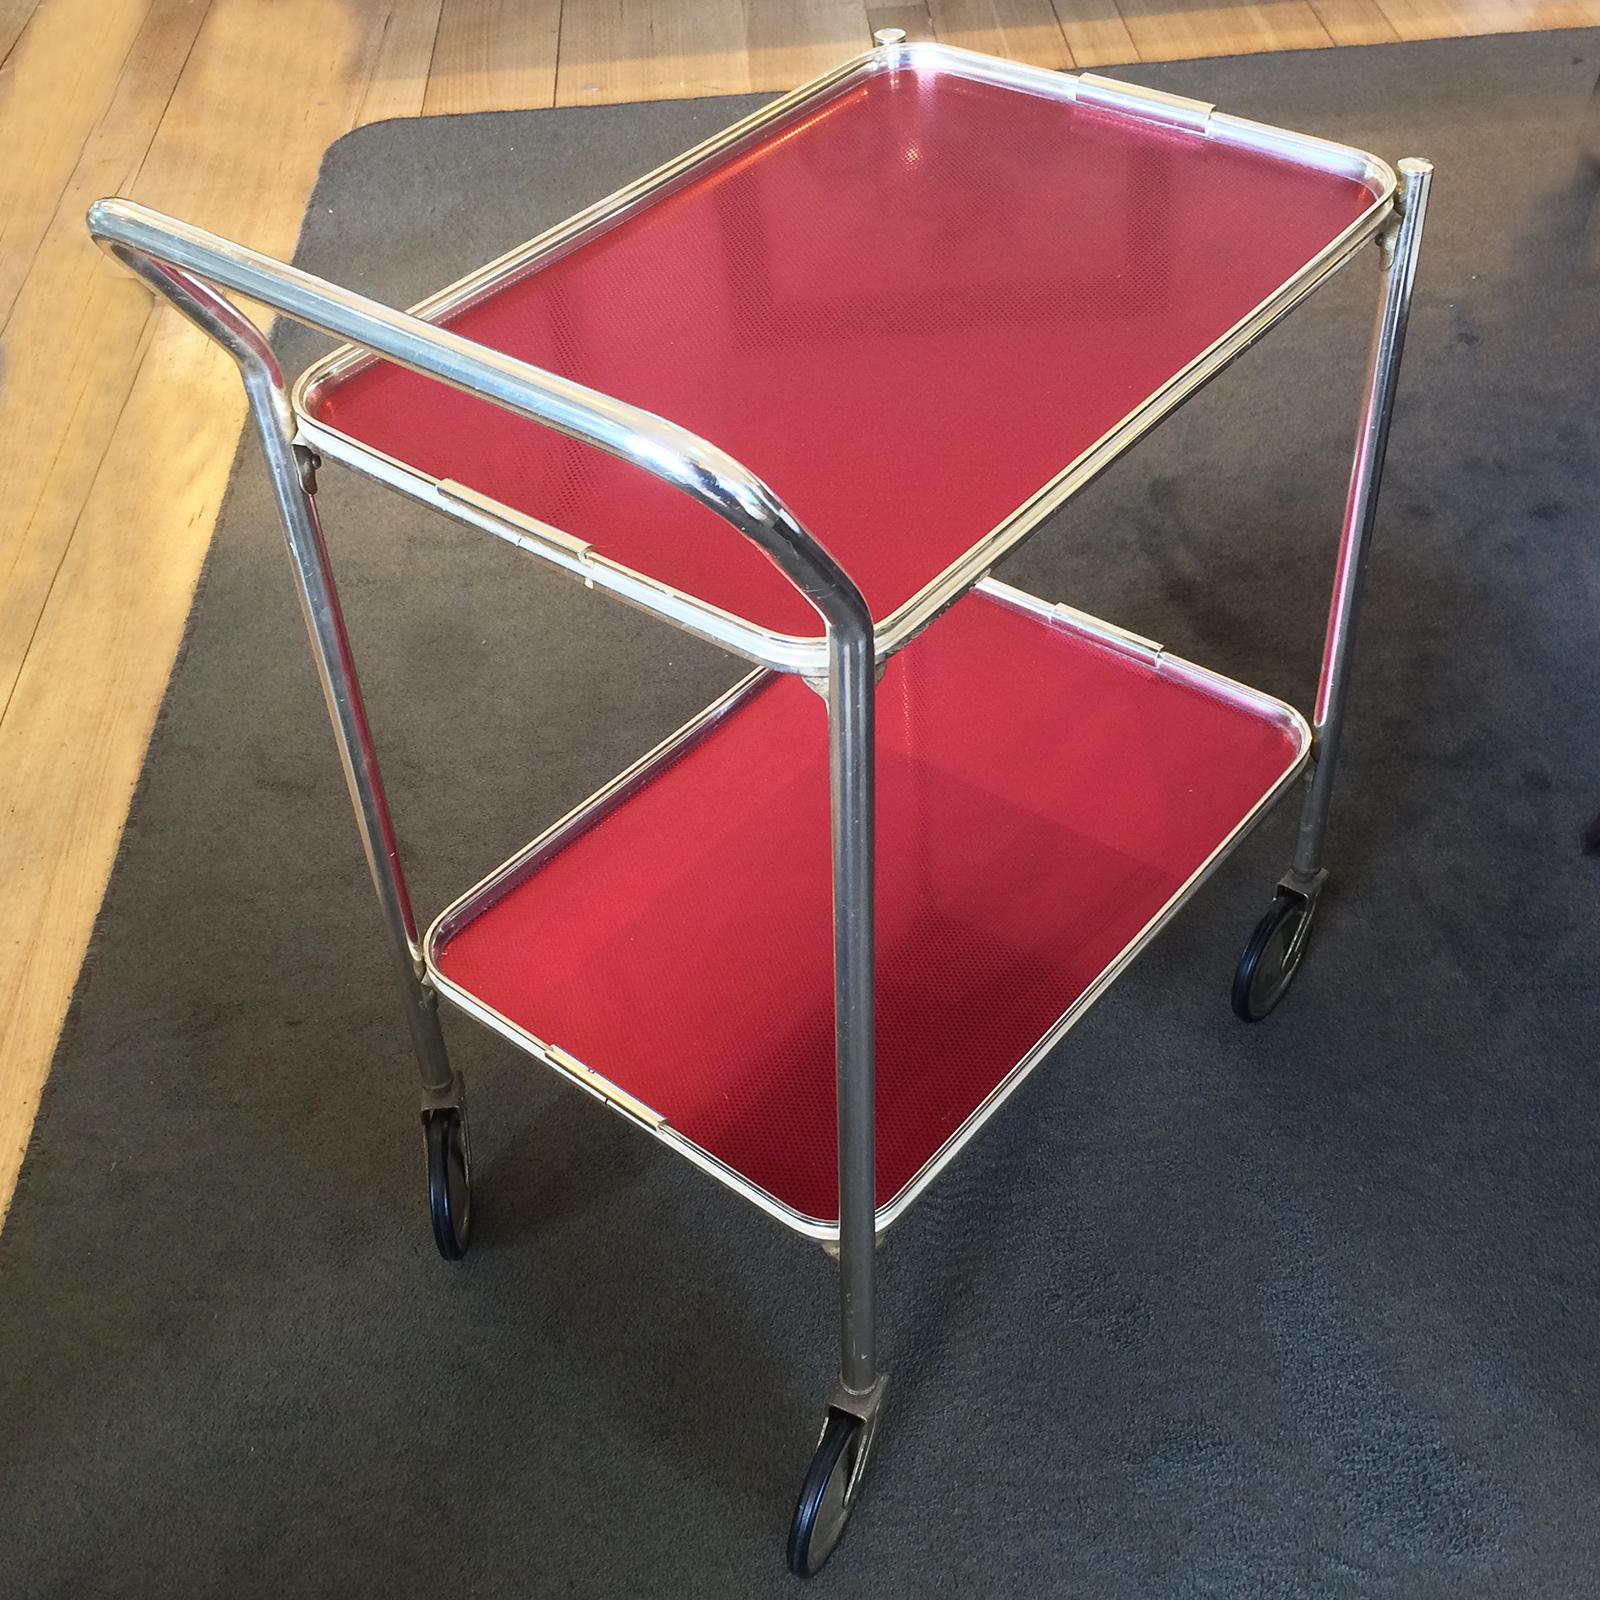 Midcentury polished aluminium bar cart / trolley in anodised red trays, with gold edge surrounds and supports; original black rubber tyred wheels which work as new. The tyres are unworn and do not have any “flat” edges. Soft aged patina but the